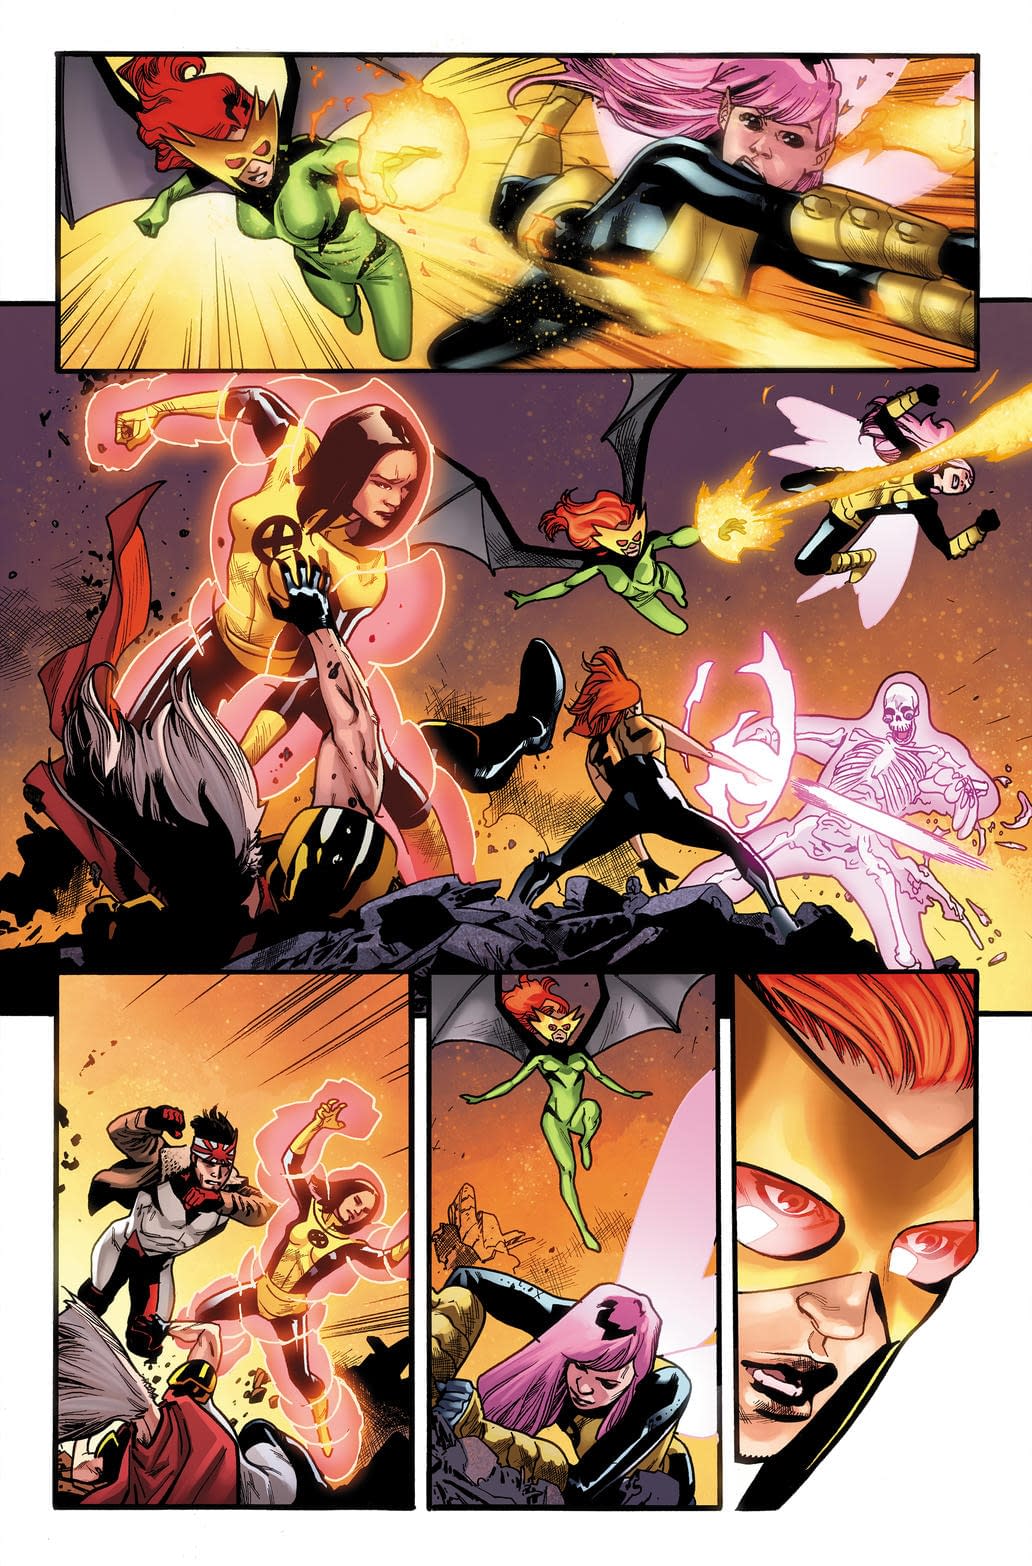 Uncanny X-Men #1: A New Preview, and Writers' Finals Words